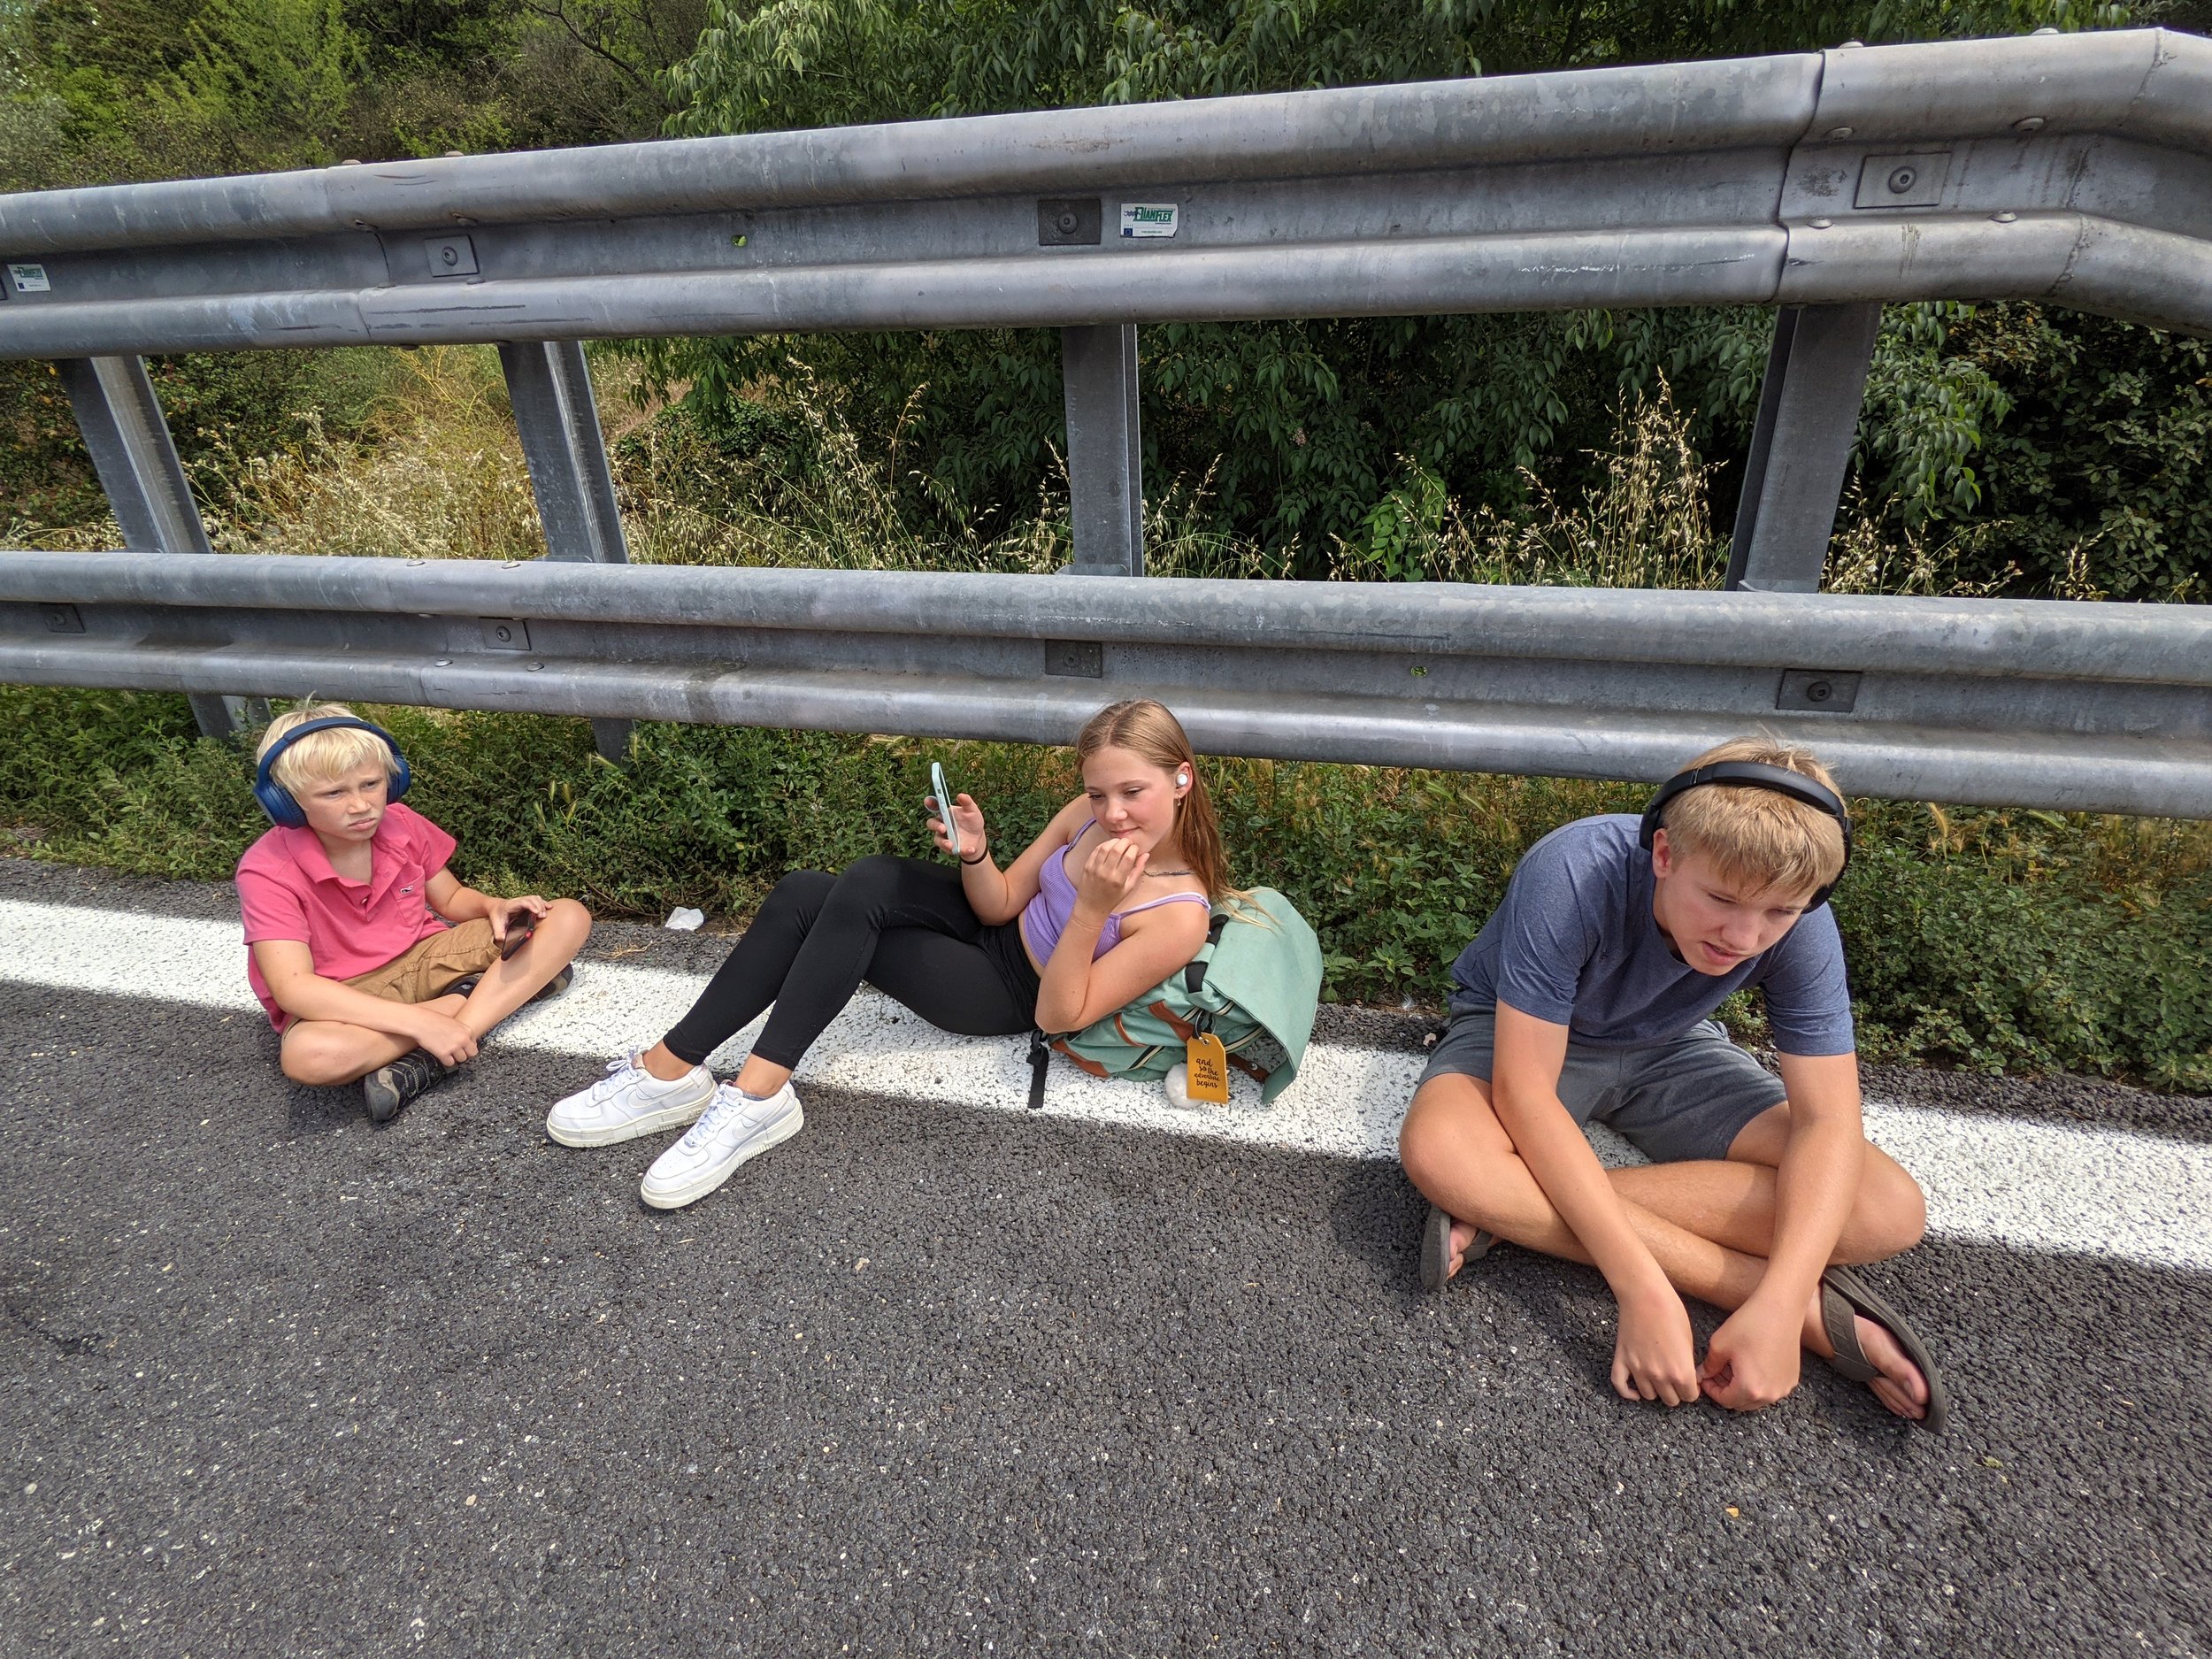  The kids chilling on the autostrade in Italy after the breakdown 